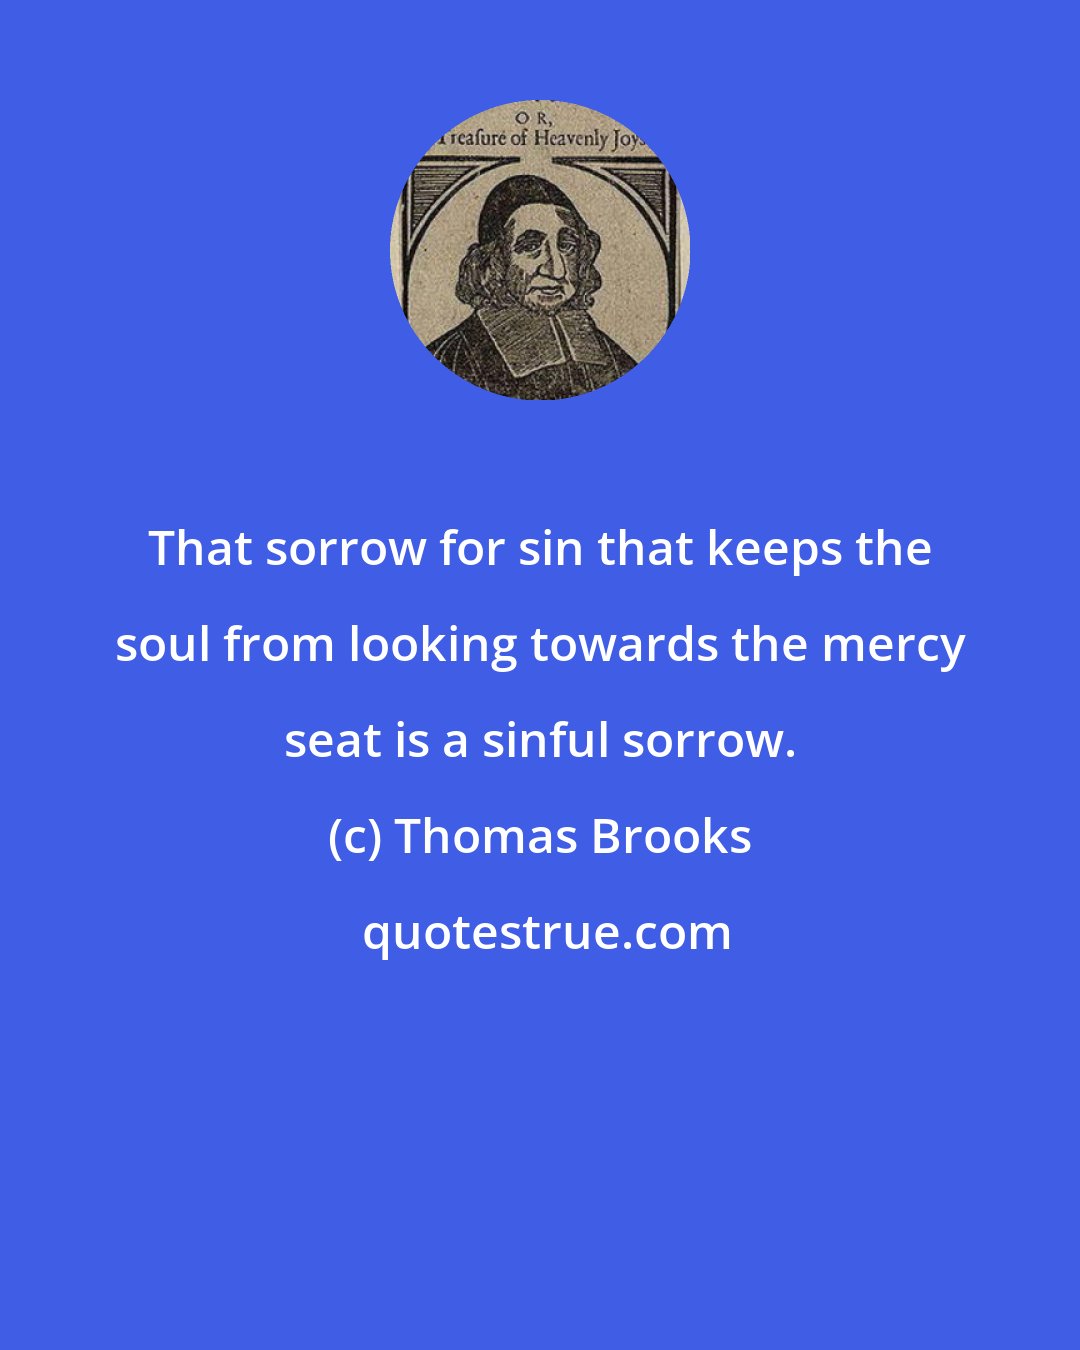 Thomas Brooks: That sorrow for sin that keeps the soul from looking towards the mercy seat is a sinful sorrow.